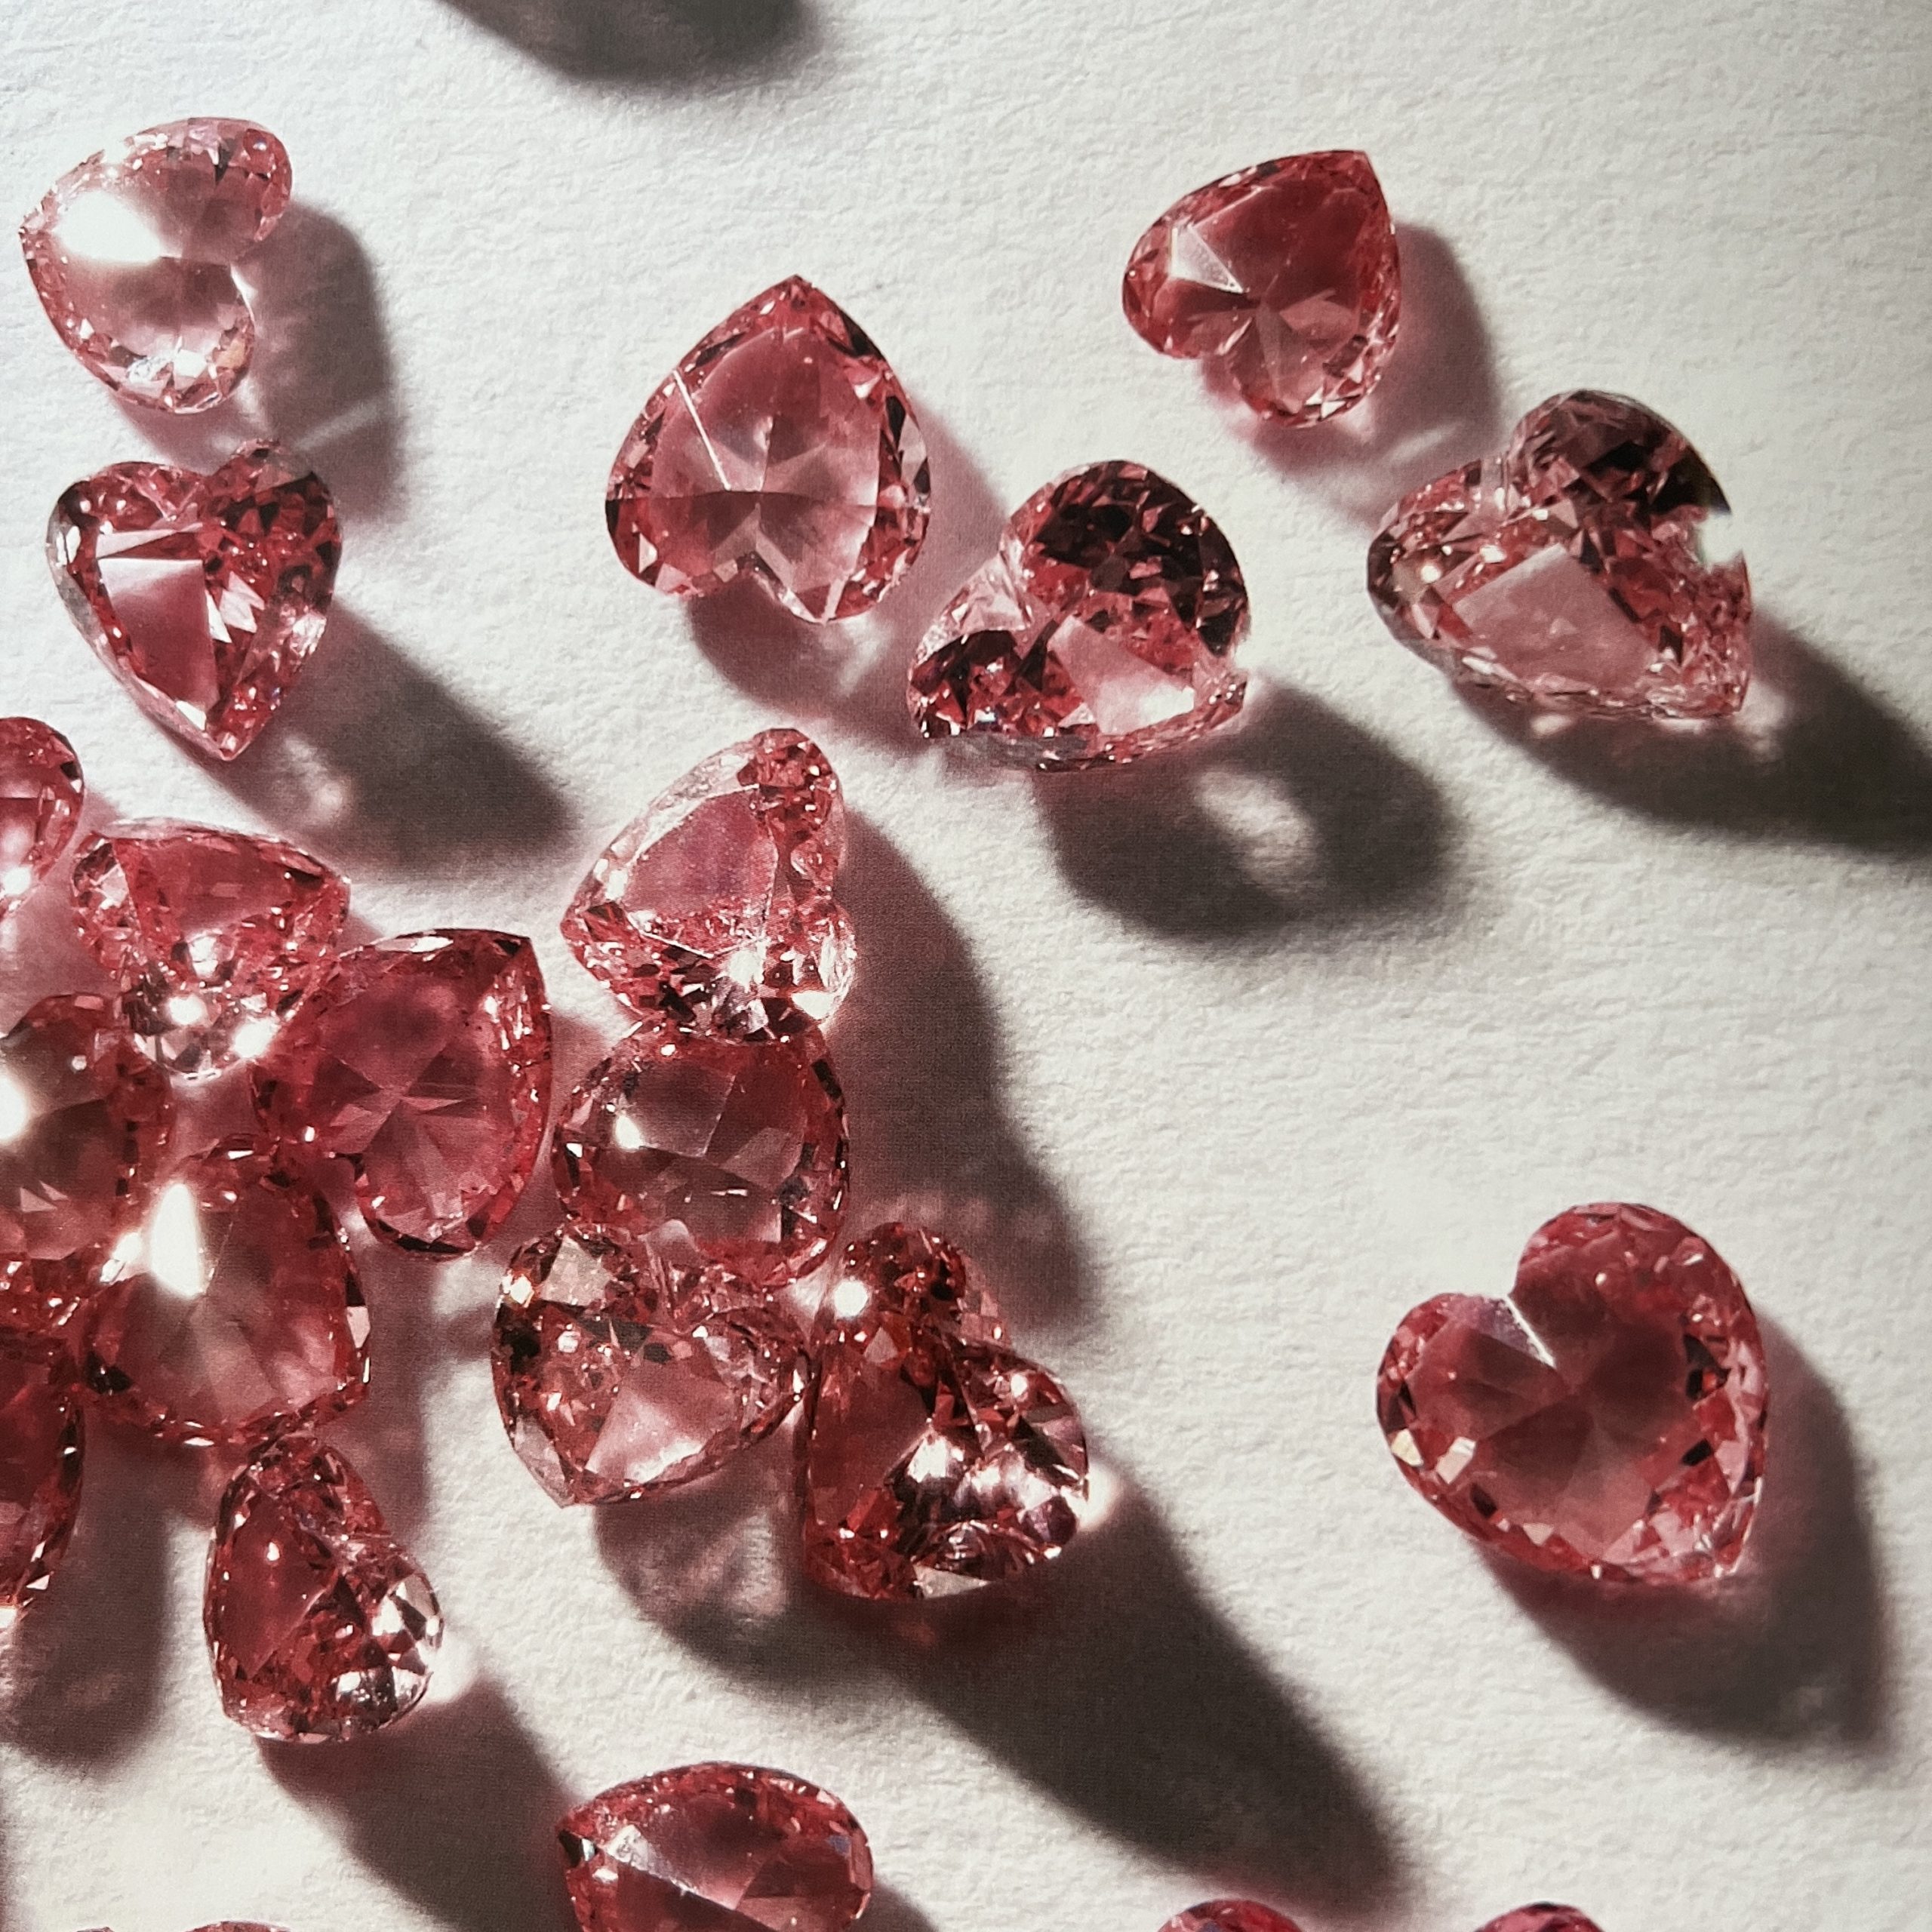 We need to talk about pink diamonds